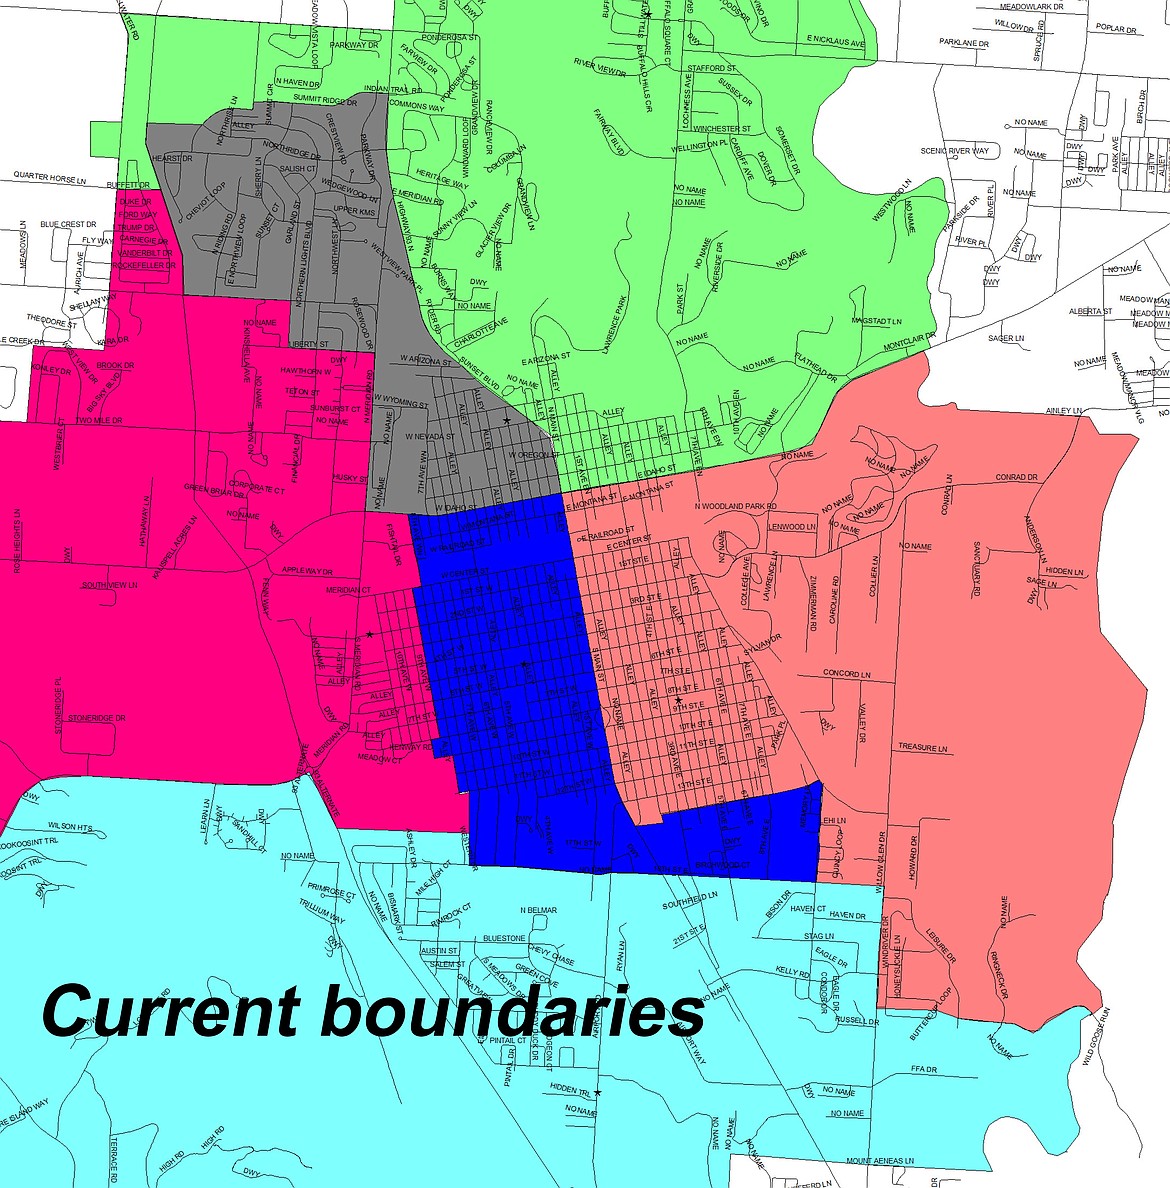 Current elementary district boundaries in Kalispell Public Schools. Minor changes were approved by the school board on Tuesday.
Key: green, Edgerton; gray, Russell; dark blue, Elrod; pink, Hedges; purple, Peterson; light blue, Rankin